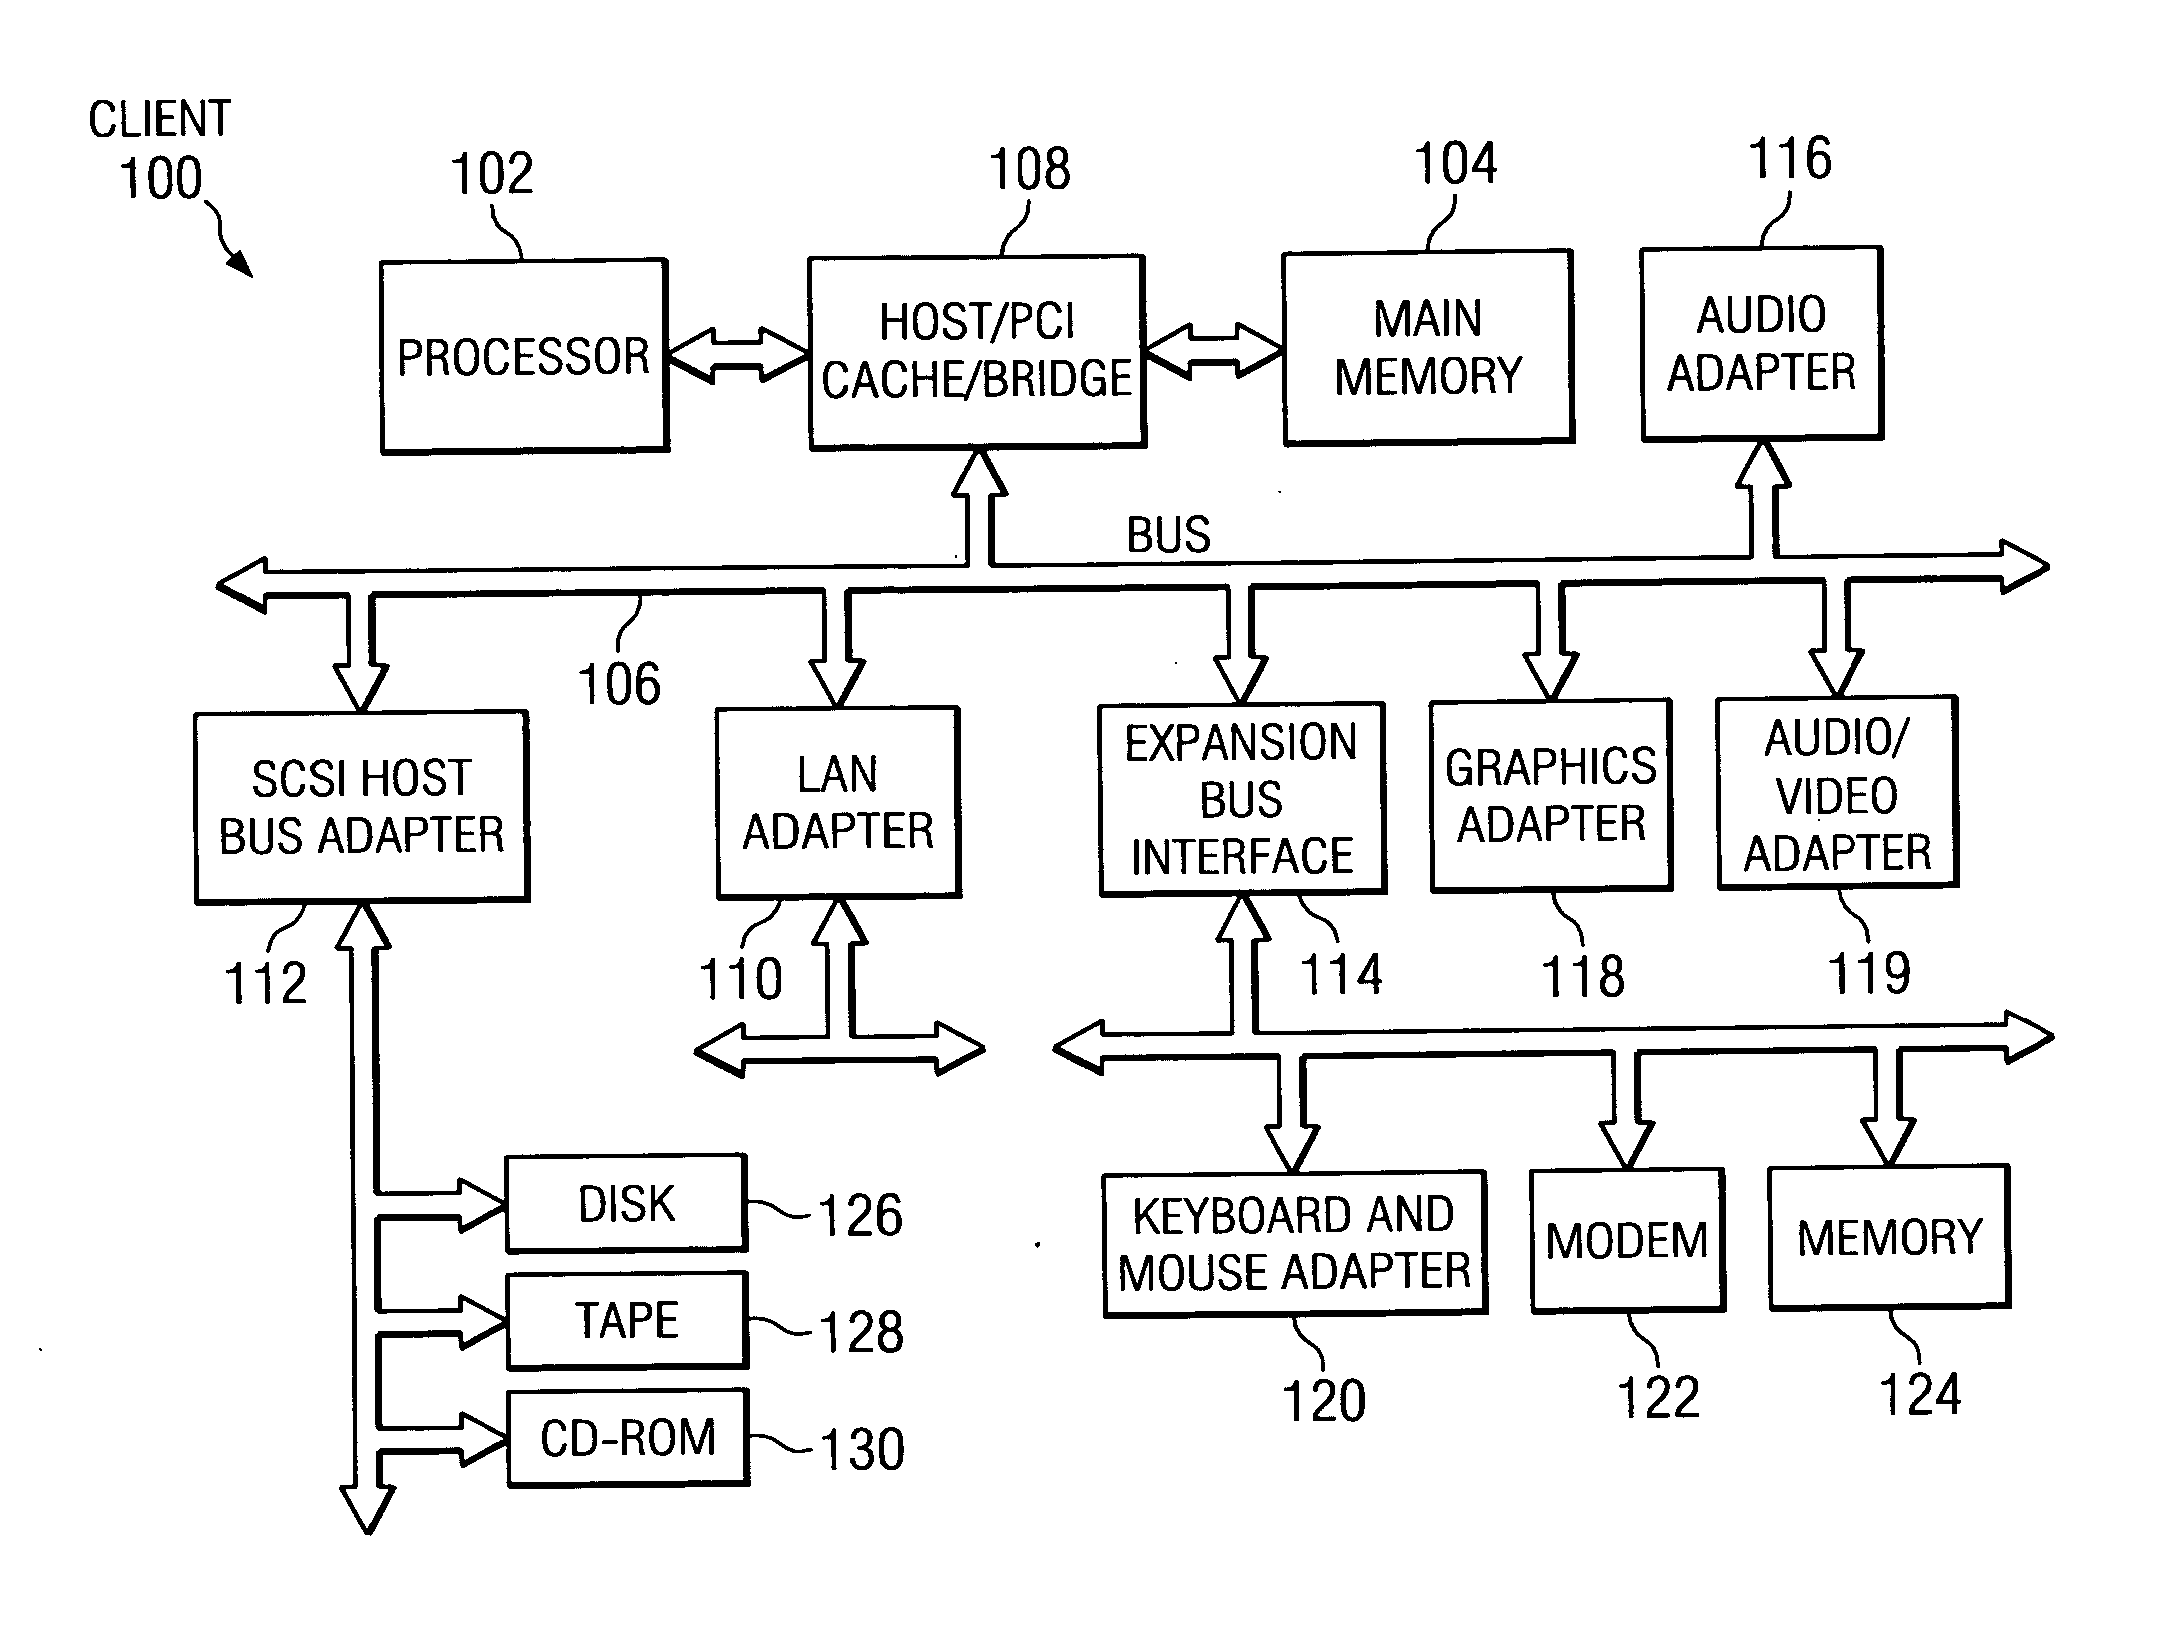 Method and apparatus to autonomically profile applications